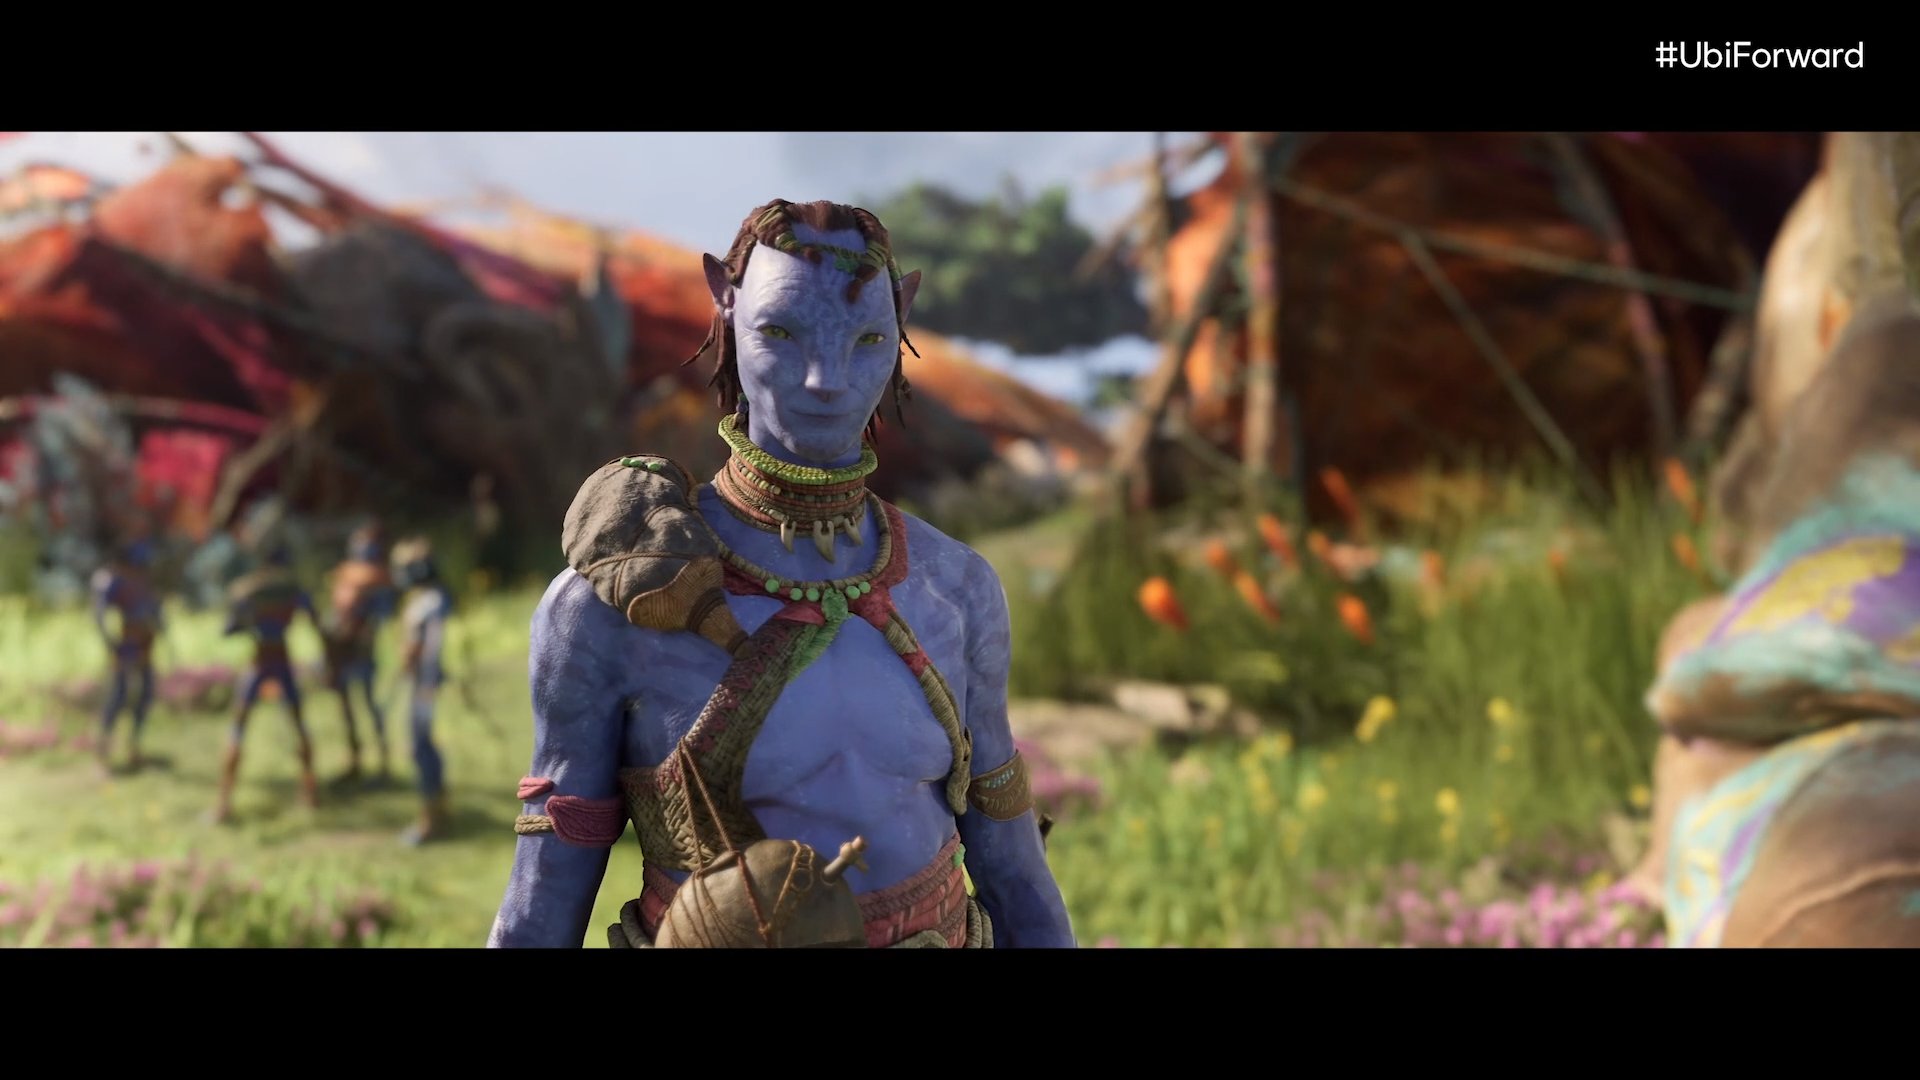 Avatar: Frontiers of Pandora announced, slated for release in 2022 on PS XBOX Series X. S, PC, Stadia, and Luna